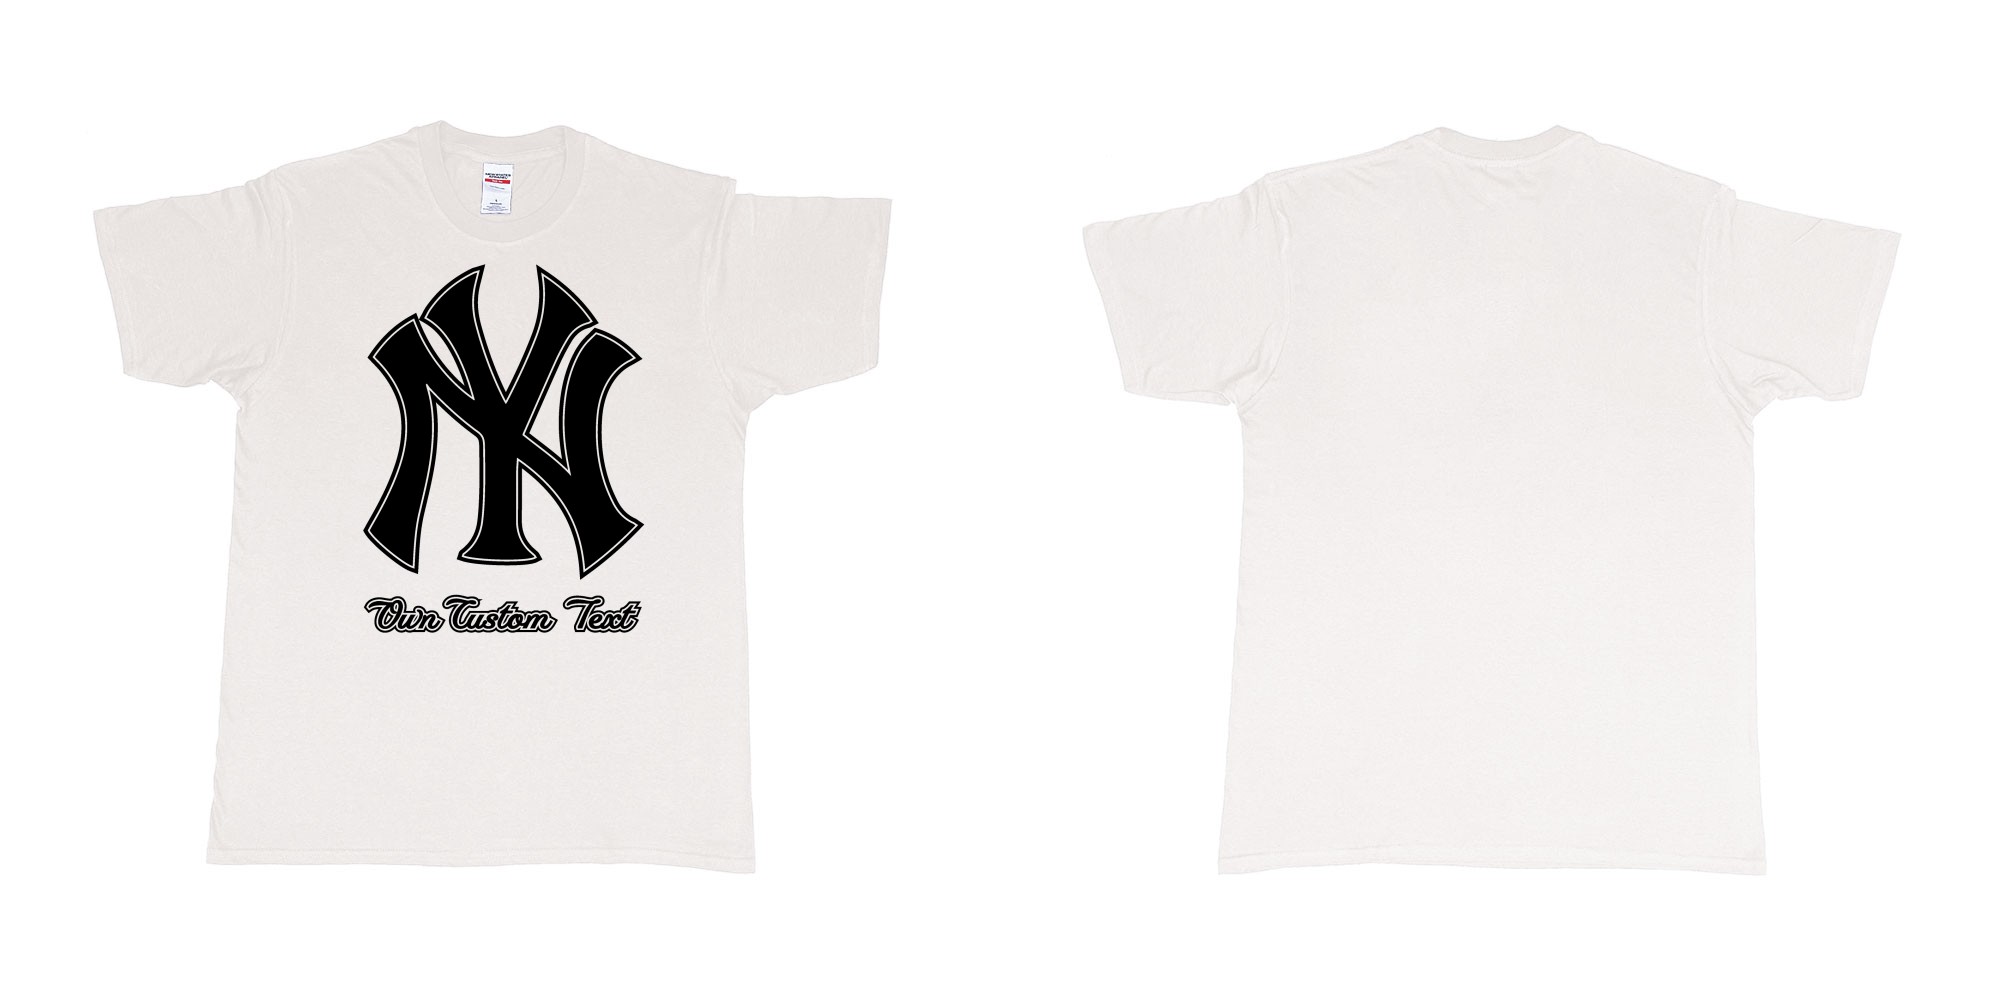 Custom tshirt design new york yankees baseball team custom design in fabric color white choice your own text made in Bali by The Pirate Way